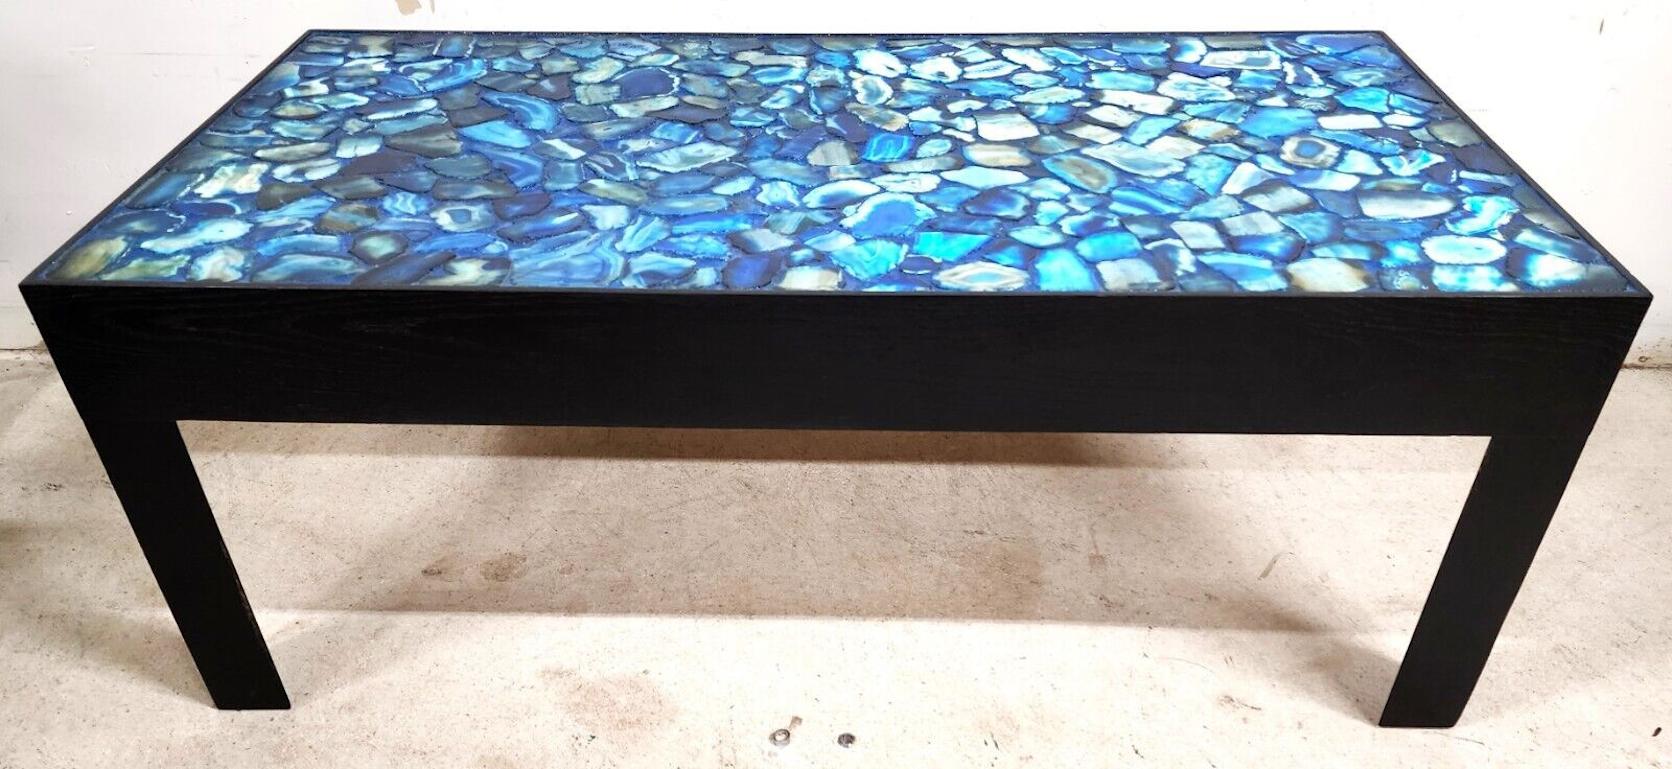 Hand-Crafted Blue Agate Coffee Table Backlit Custom Made For Sale